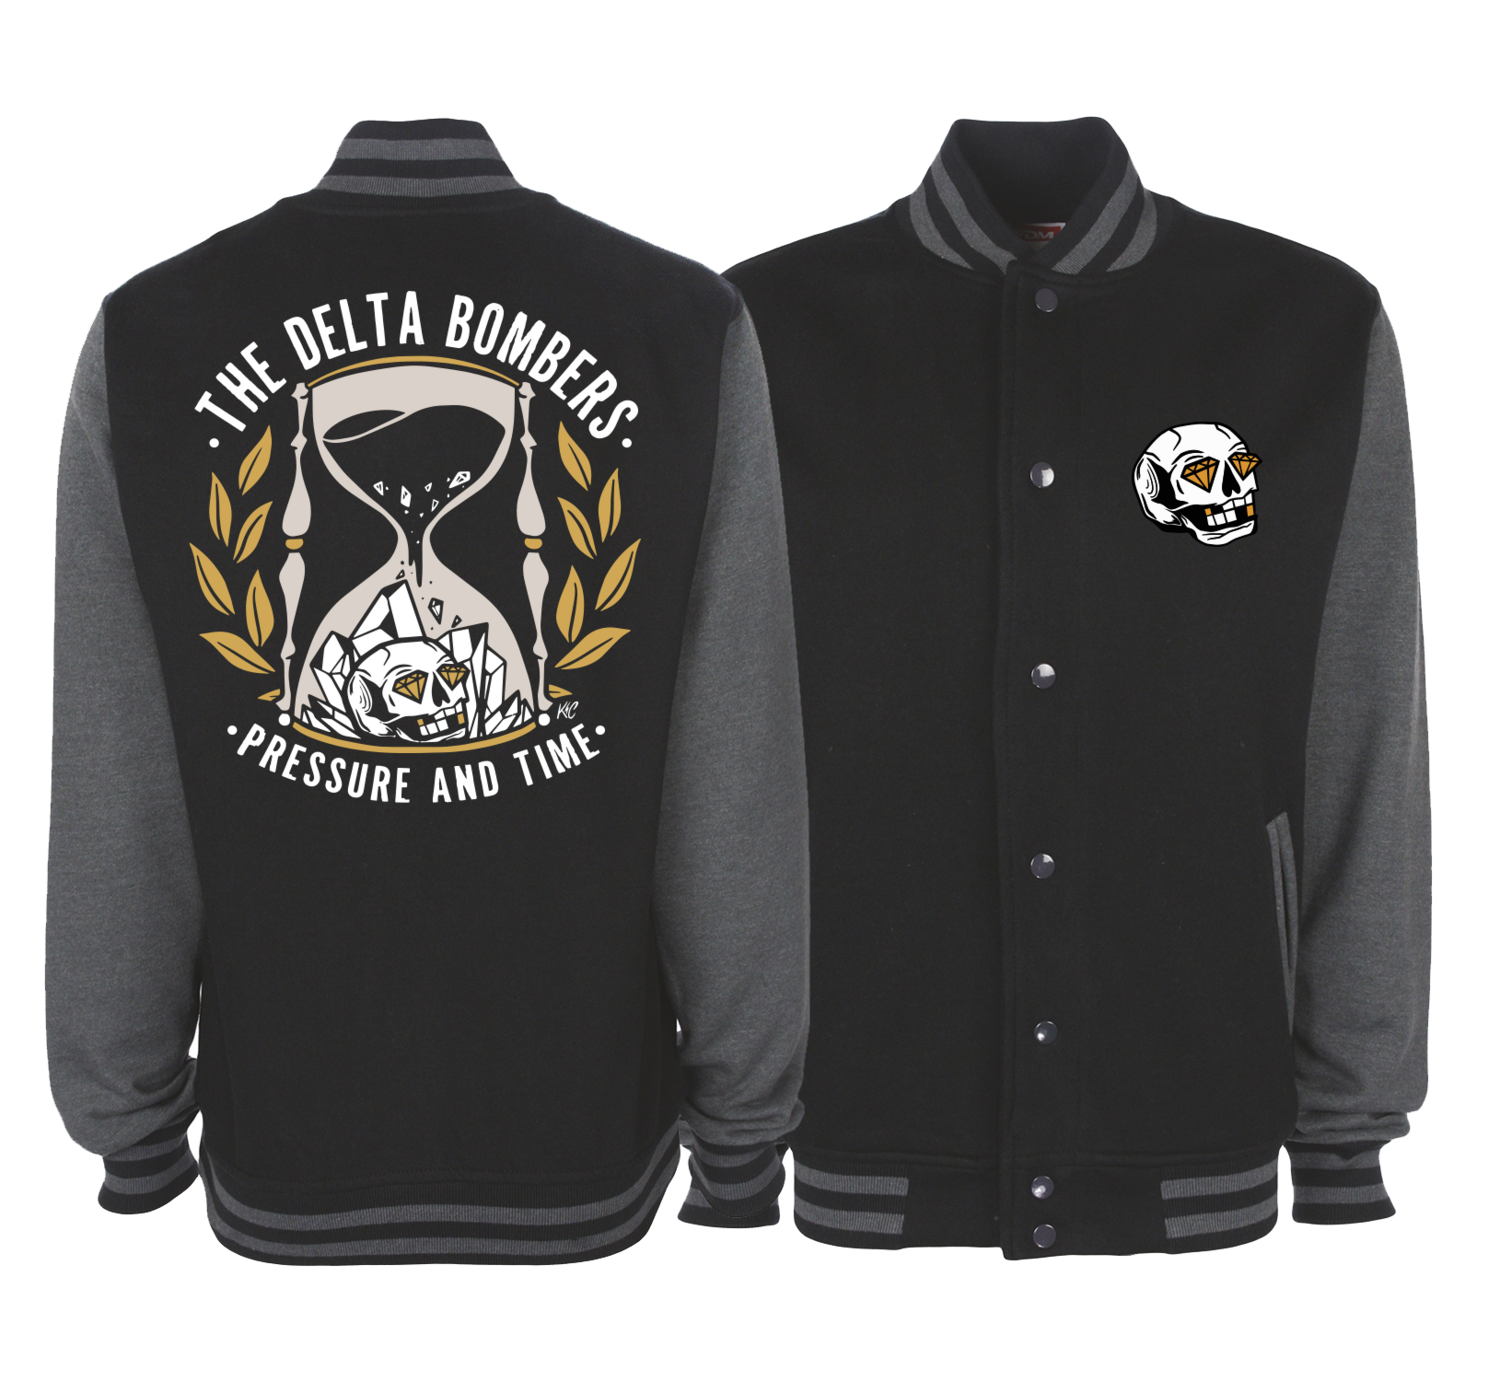 THE DELTA BOMBERS "Pressure and time" VARSITY JACKET UNISEX